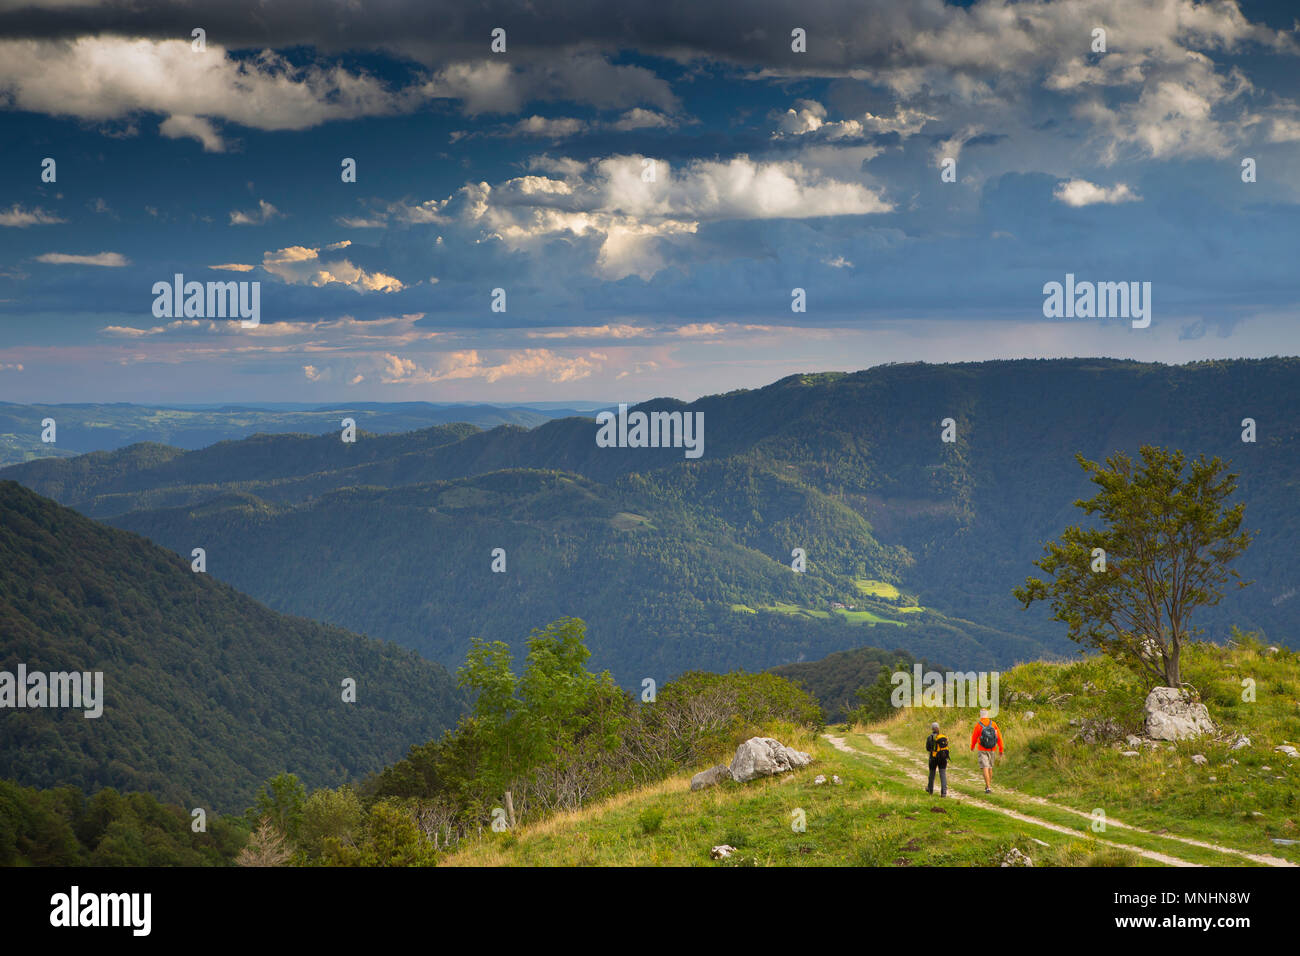 Two hikers walking down Krn mountain at end of the day overlooking beautiful scenery, Krn mountain, Triglav, Slovenia Stock Photo